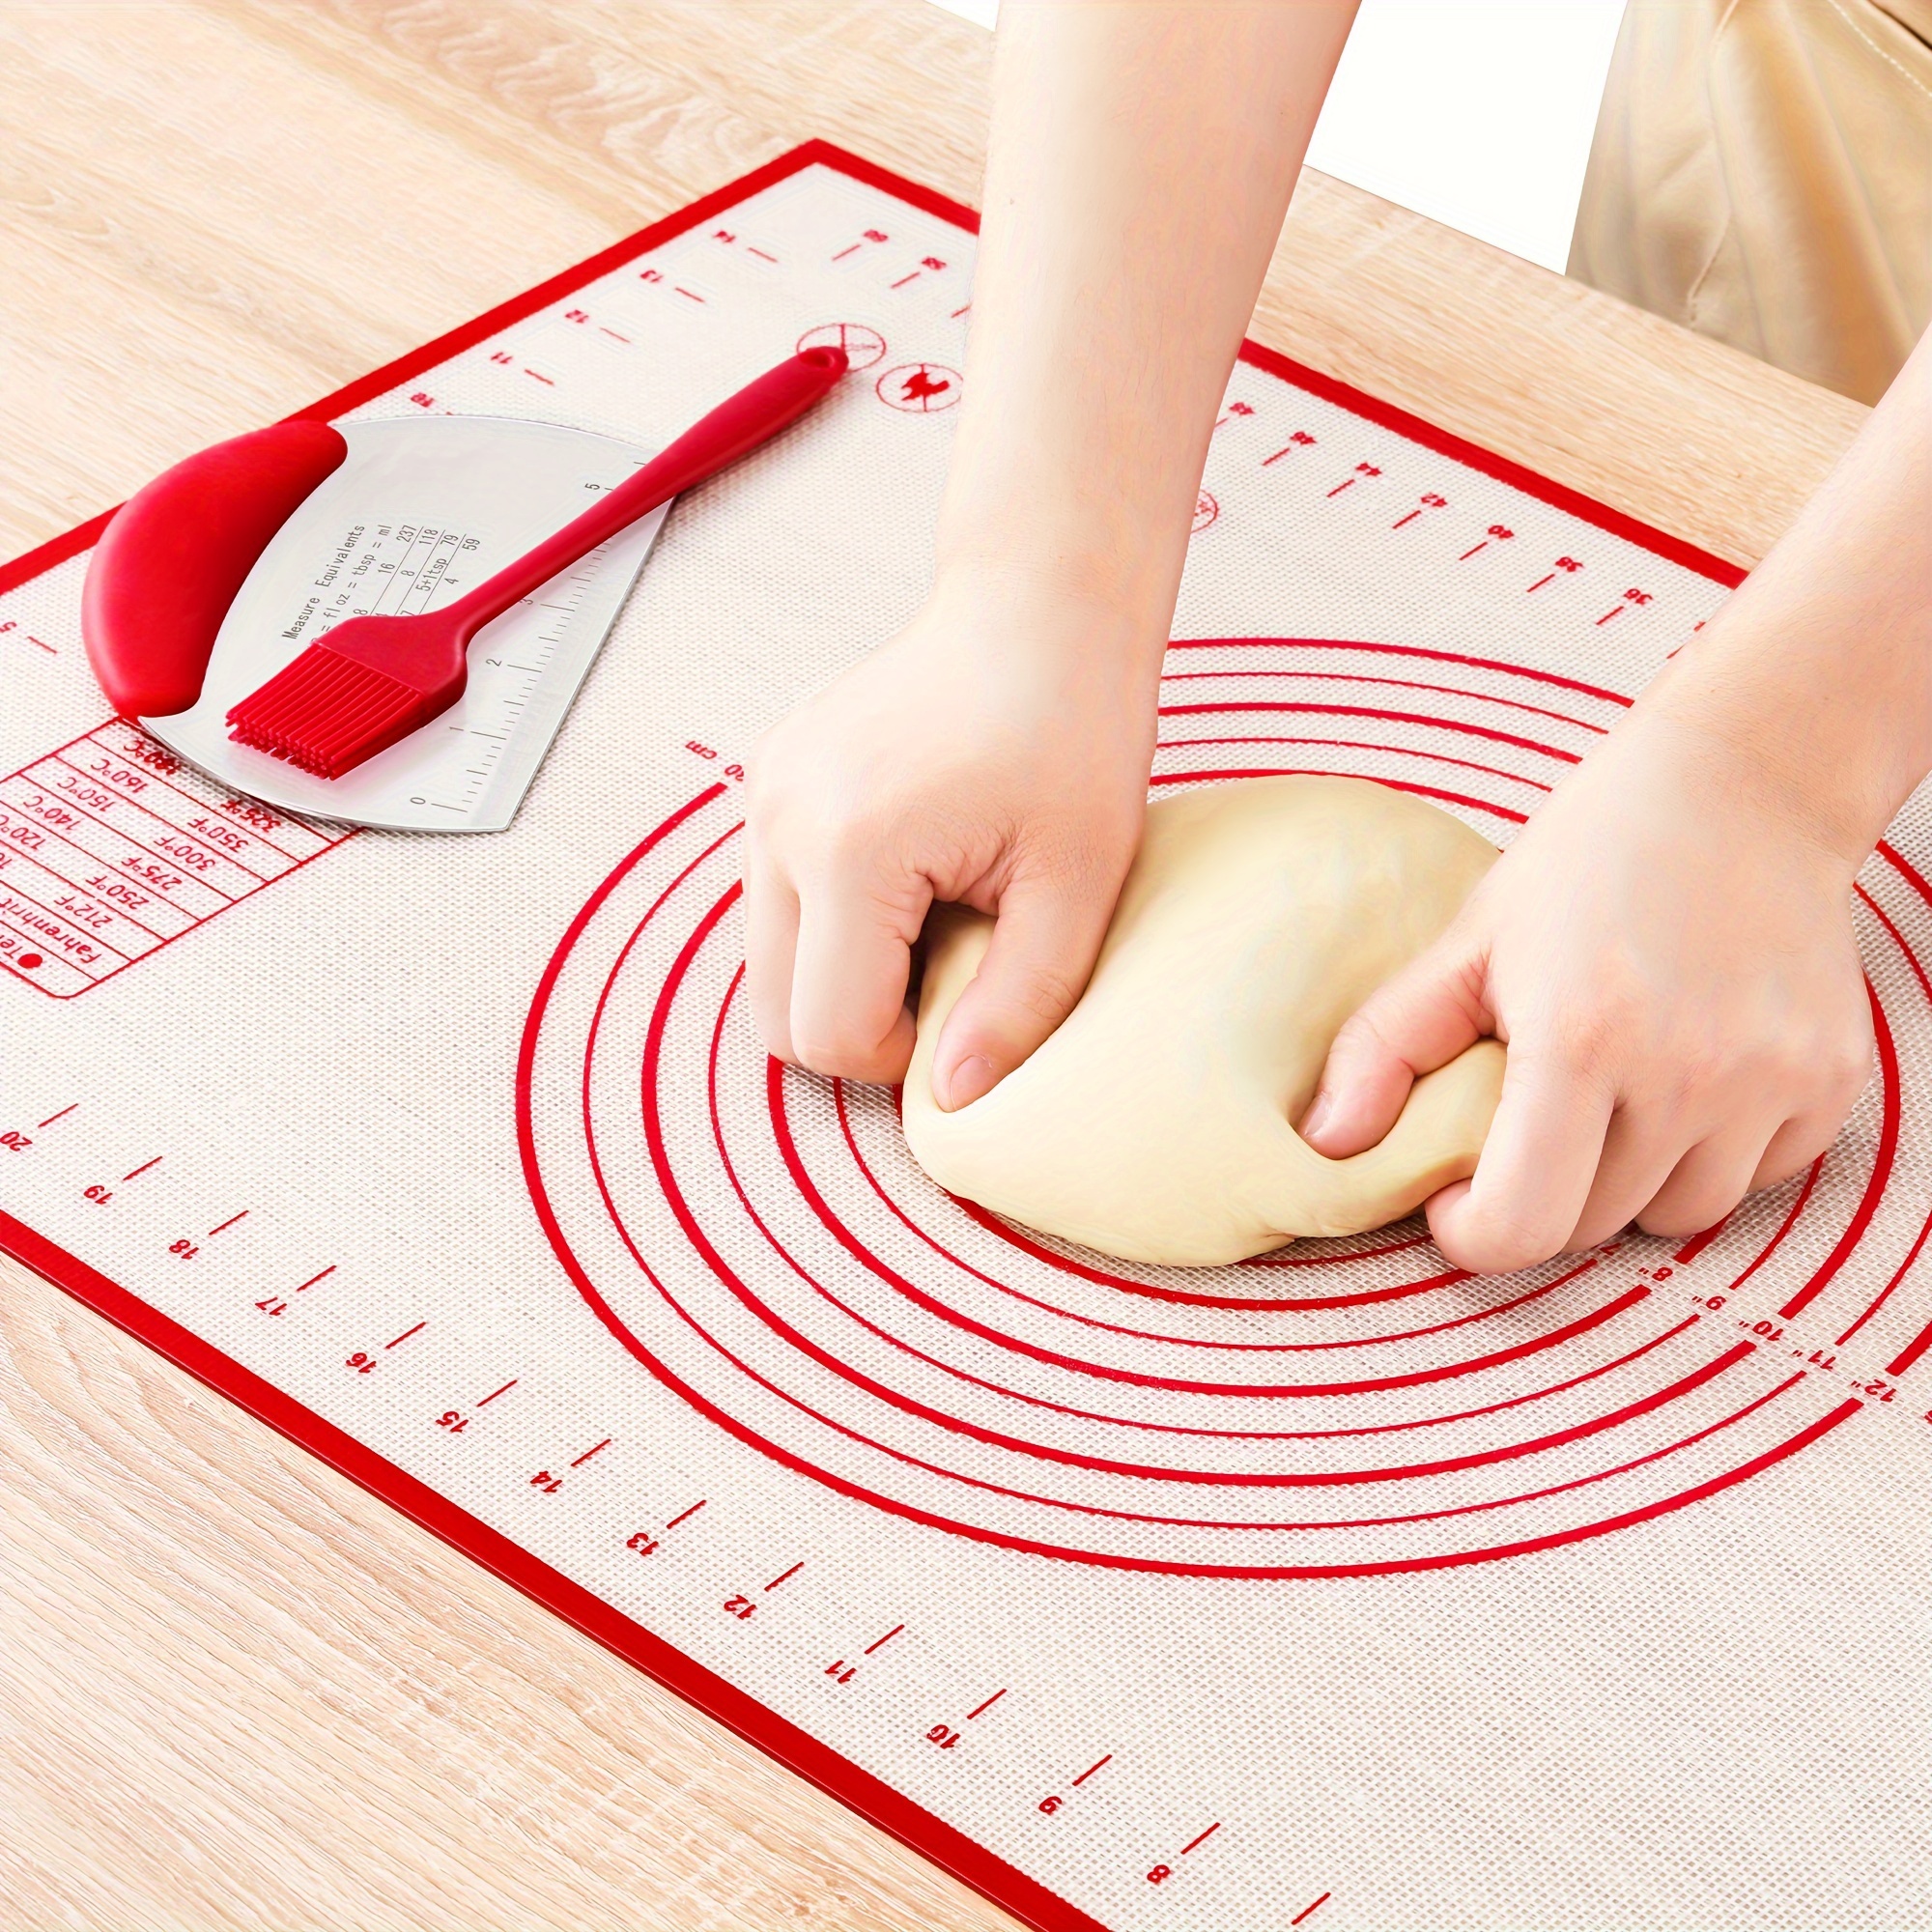 

3pcs/set Baking Accessories, 26x16 Inch Non-stick Silicone Baking Mat + Dough Pastry Scraper + Silicone Brush For Cookies, Bread, And Pastry With Measurements 14" By 24